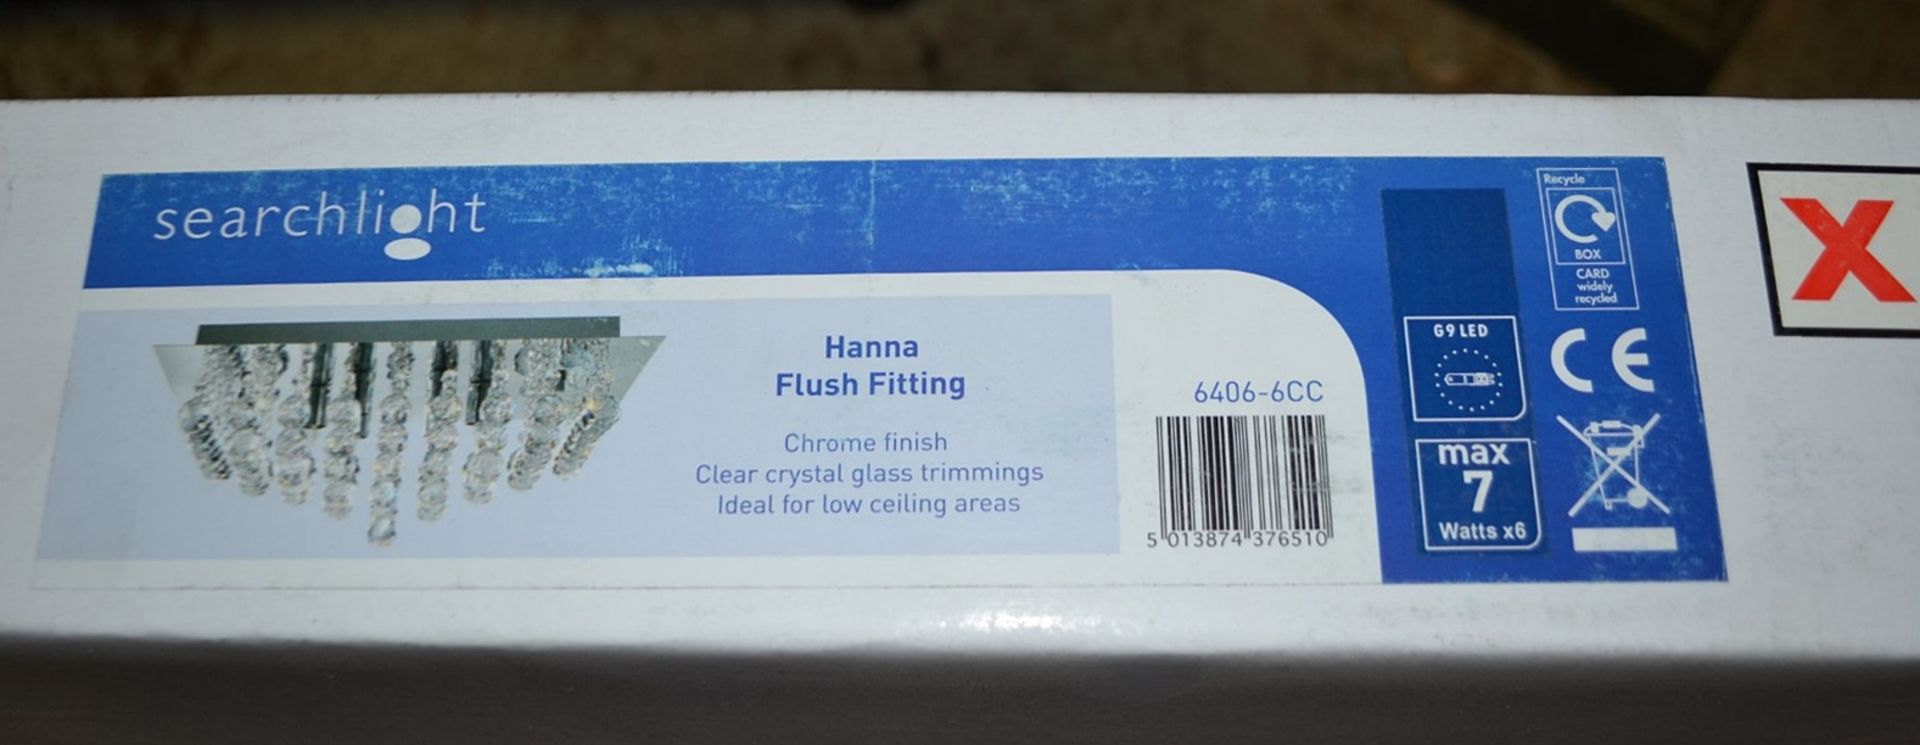 1 x Searchlight Hanna Chrome 6-Light Square Semi-Flush With Crystal Balls - Product Code - New Boxed - Image 2 of 2